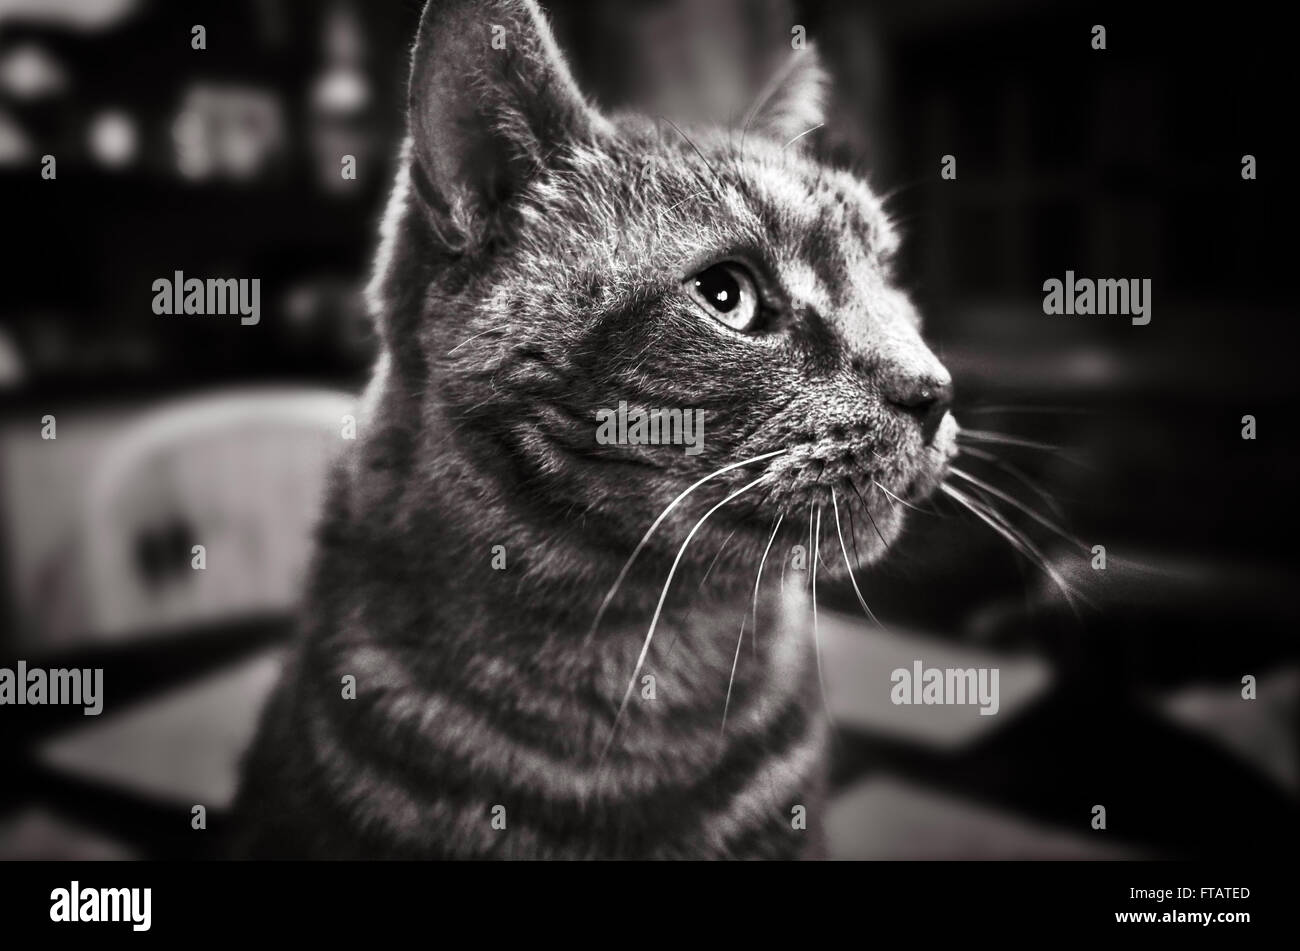 Image of a Tom Cat siting on a table and looking out of a window while the photograph was taken. Converted to Black and Whit Stock Photo